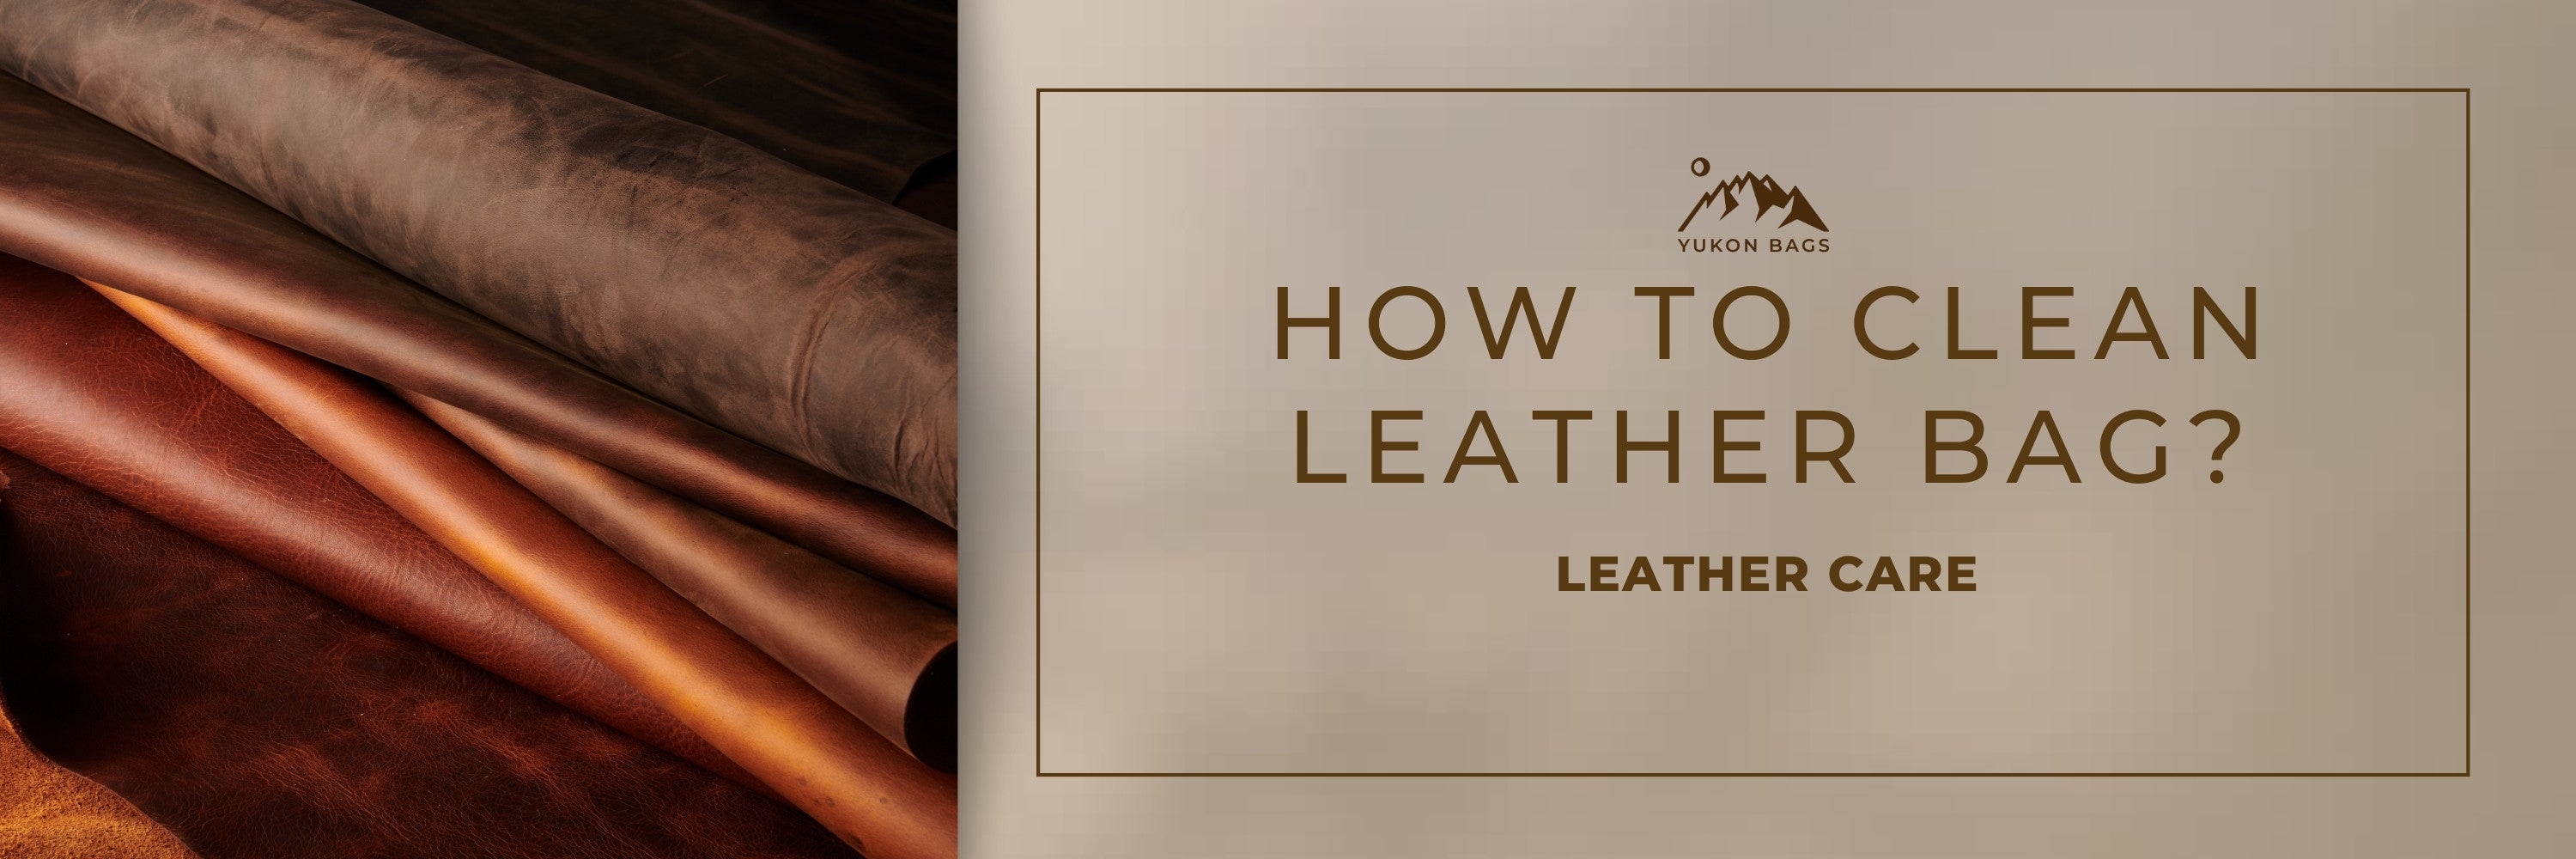 How to Clean a Leather Purse: The Complete Guide